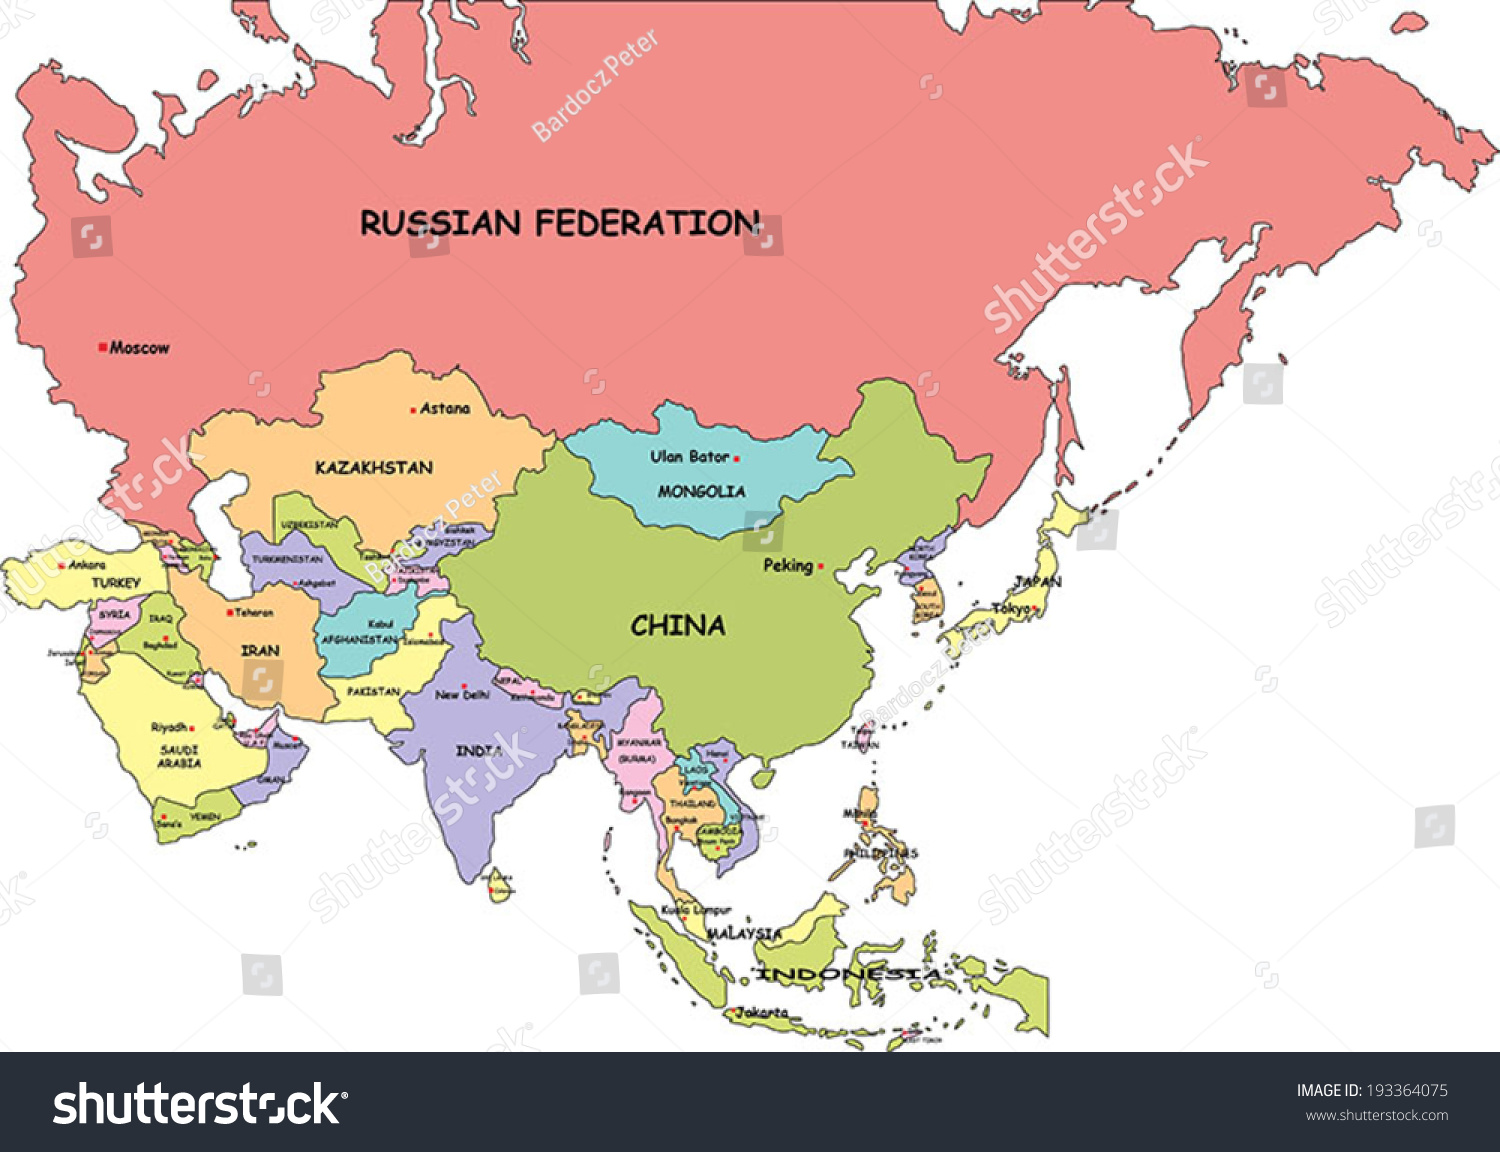 Asia Map With Country Names And Capitals Pdf 